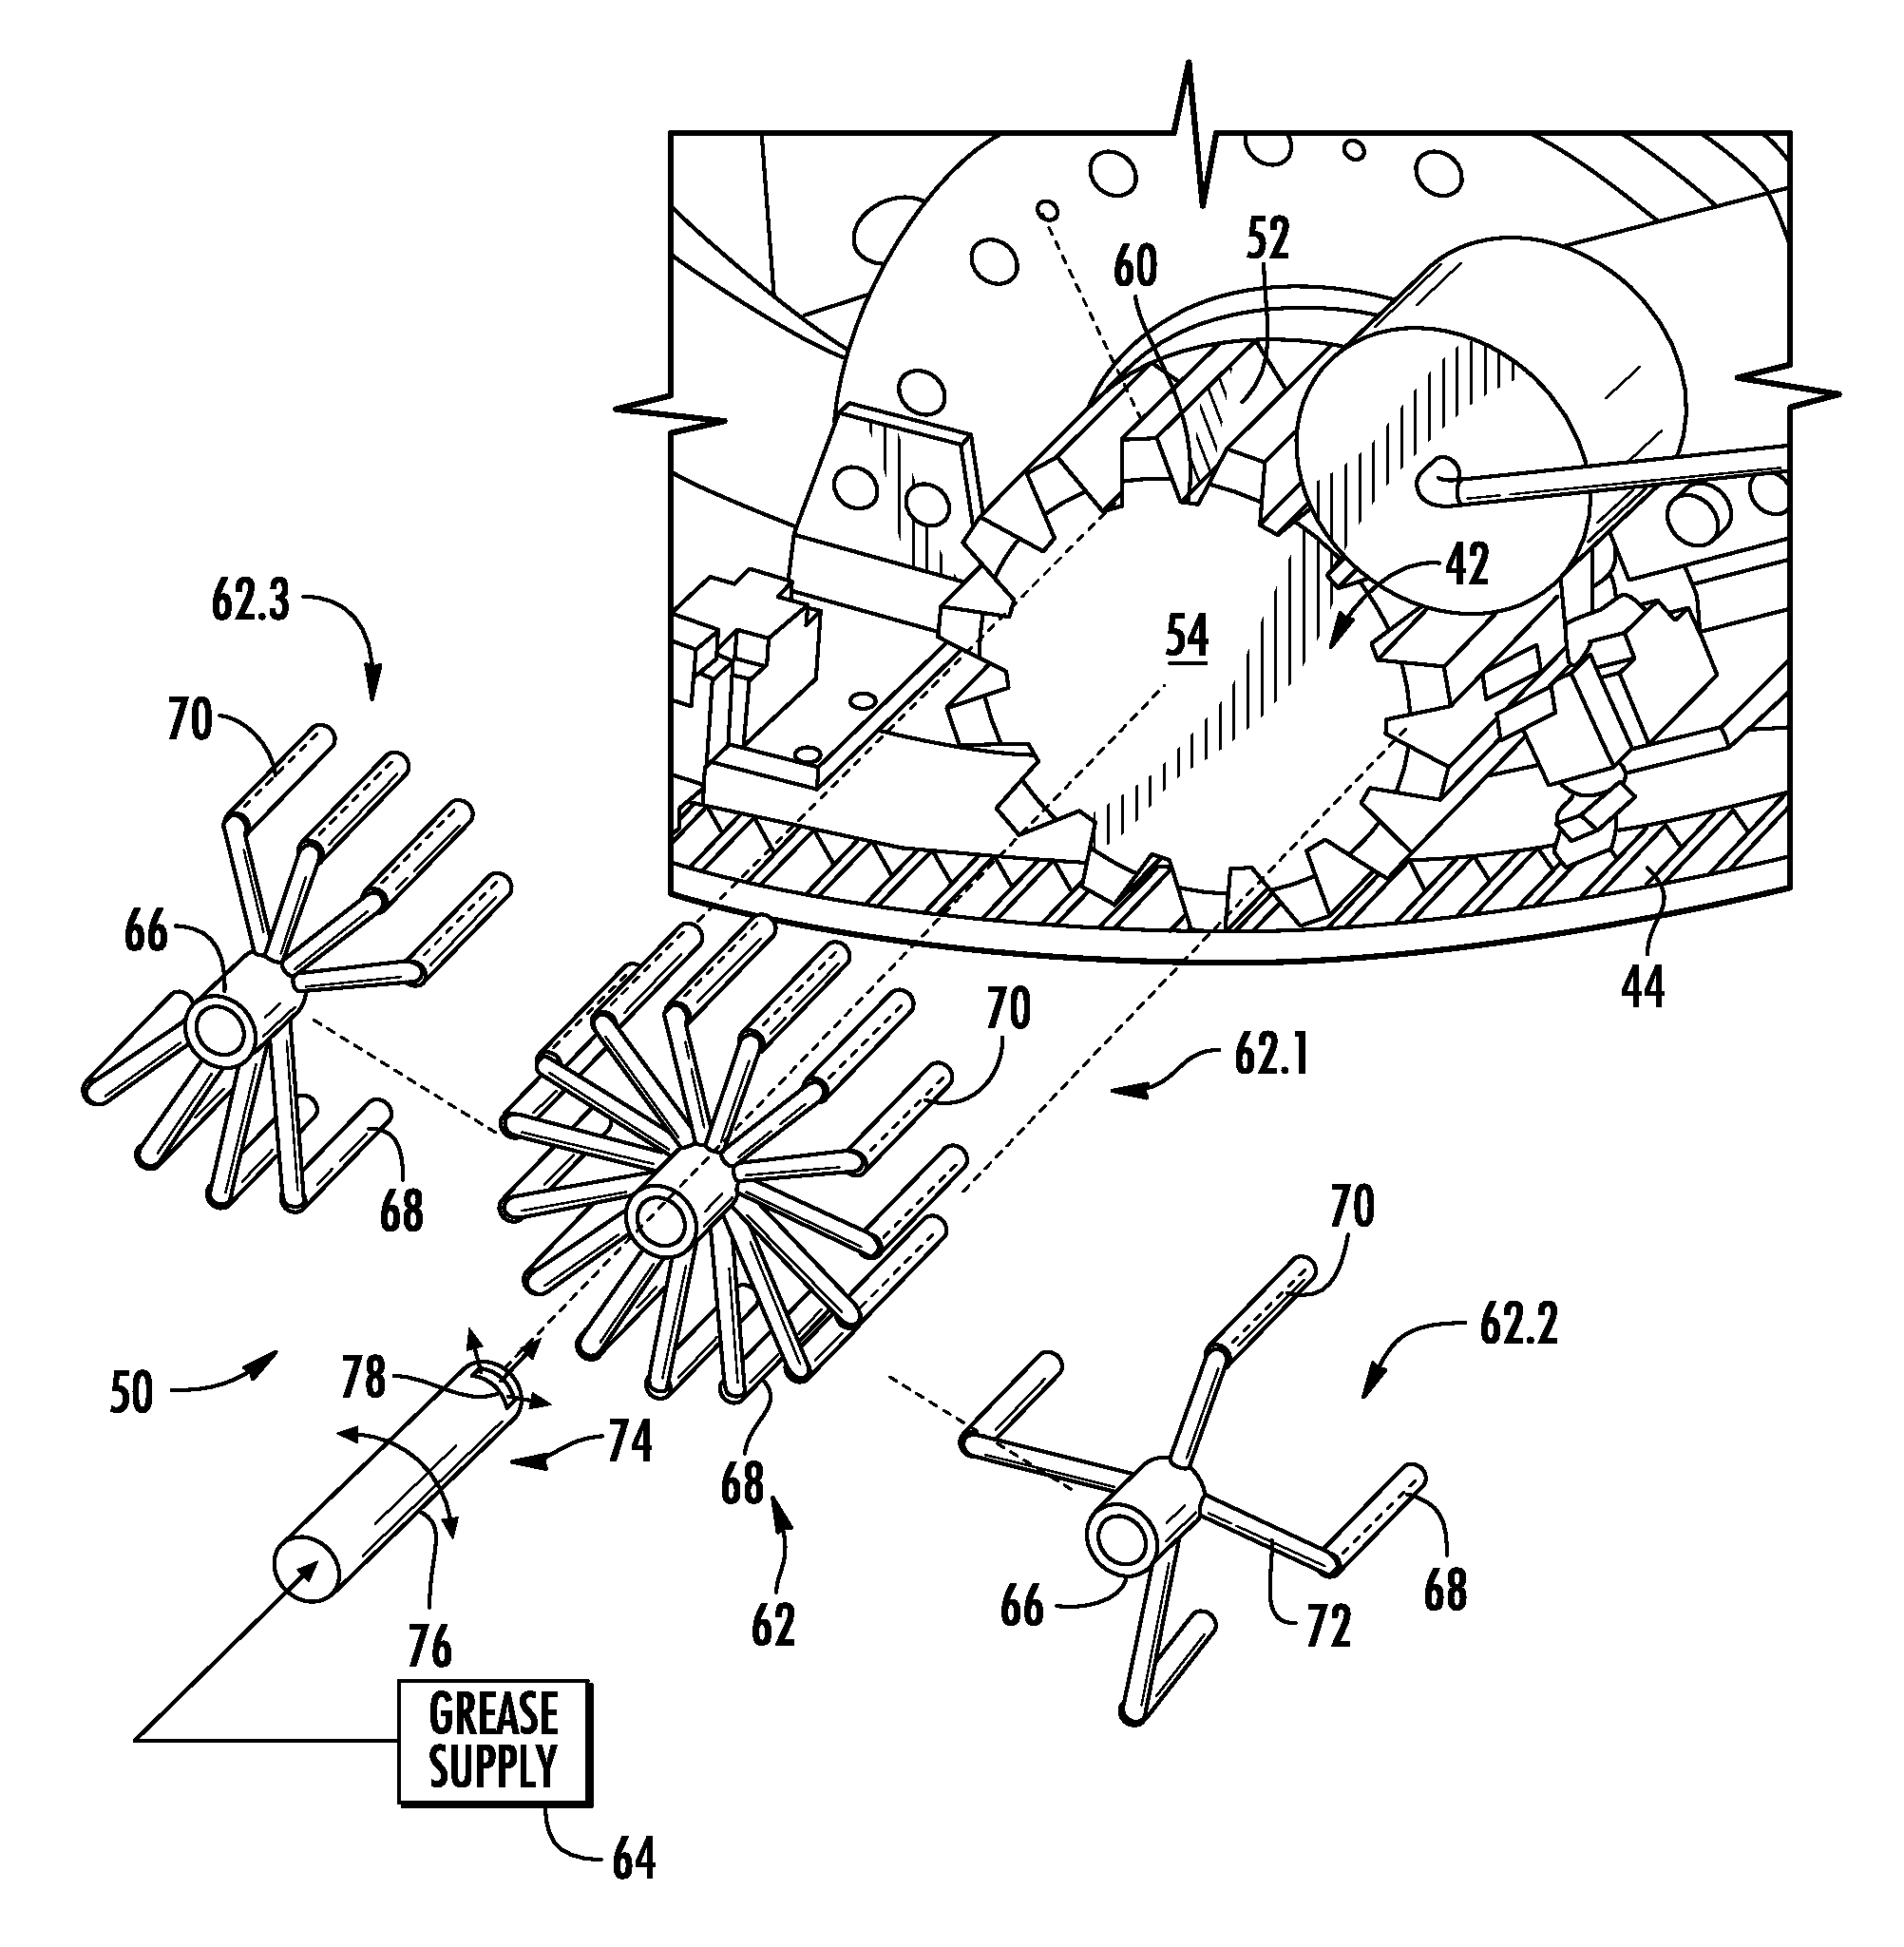 System and method for lubricating gears in a wind turbine